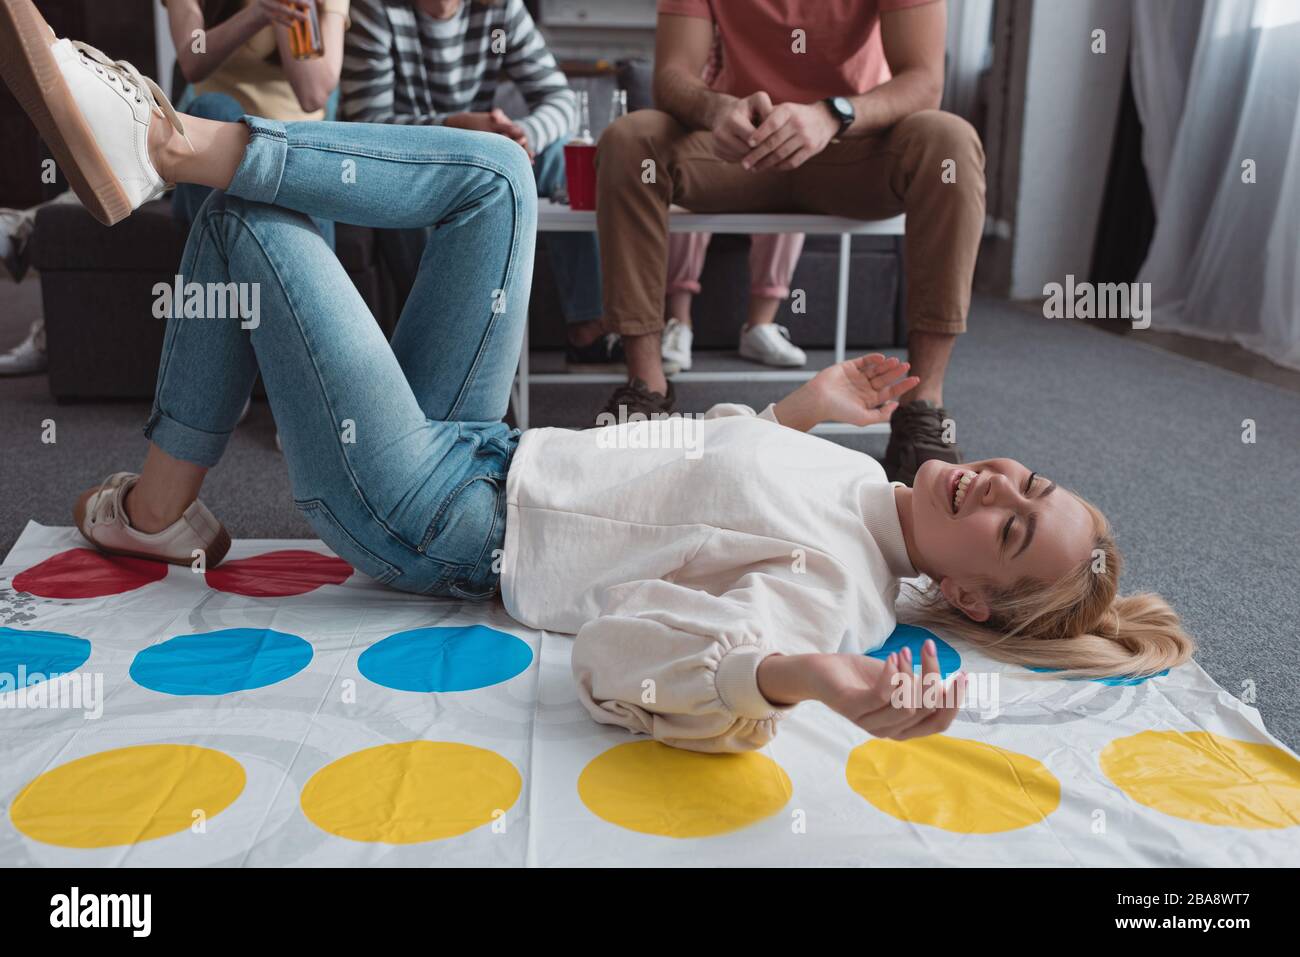 KYIV, UKRAINE - JANUARY 27, 2020: cheerful girl smiling while lying on twister game mat near friends Stock Photo